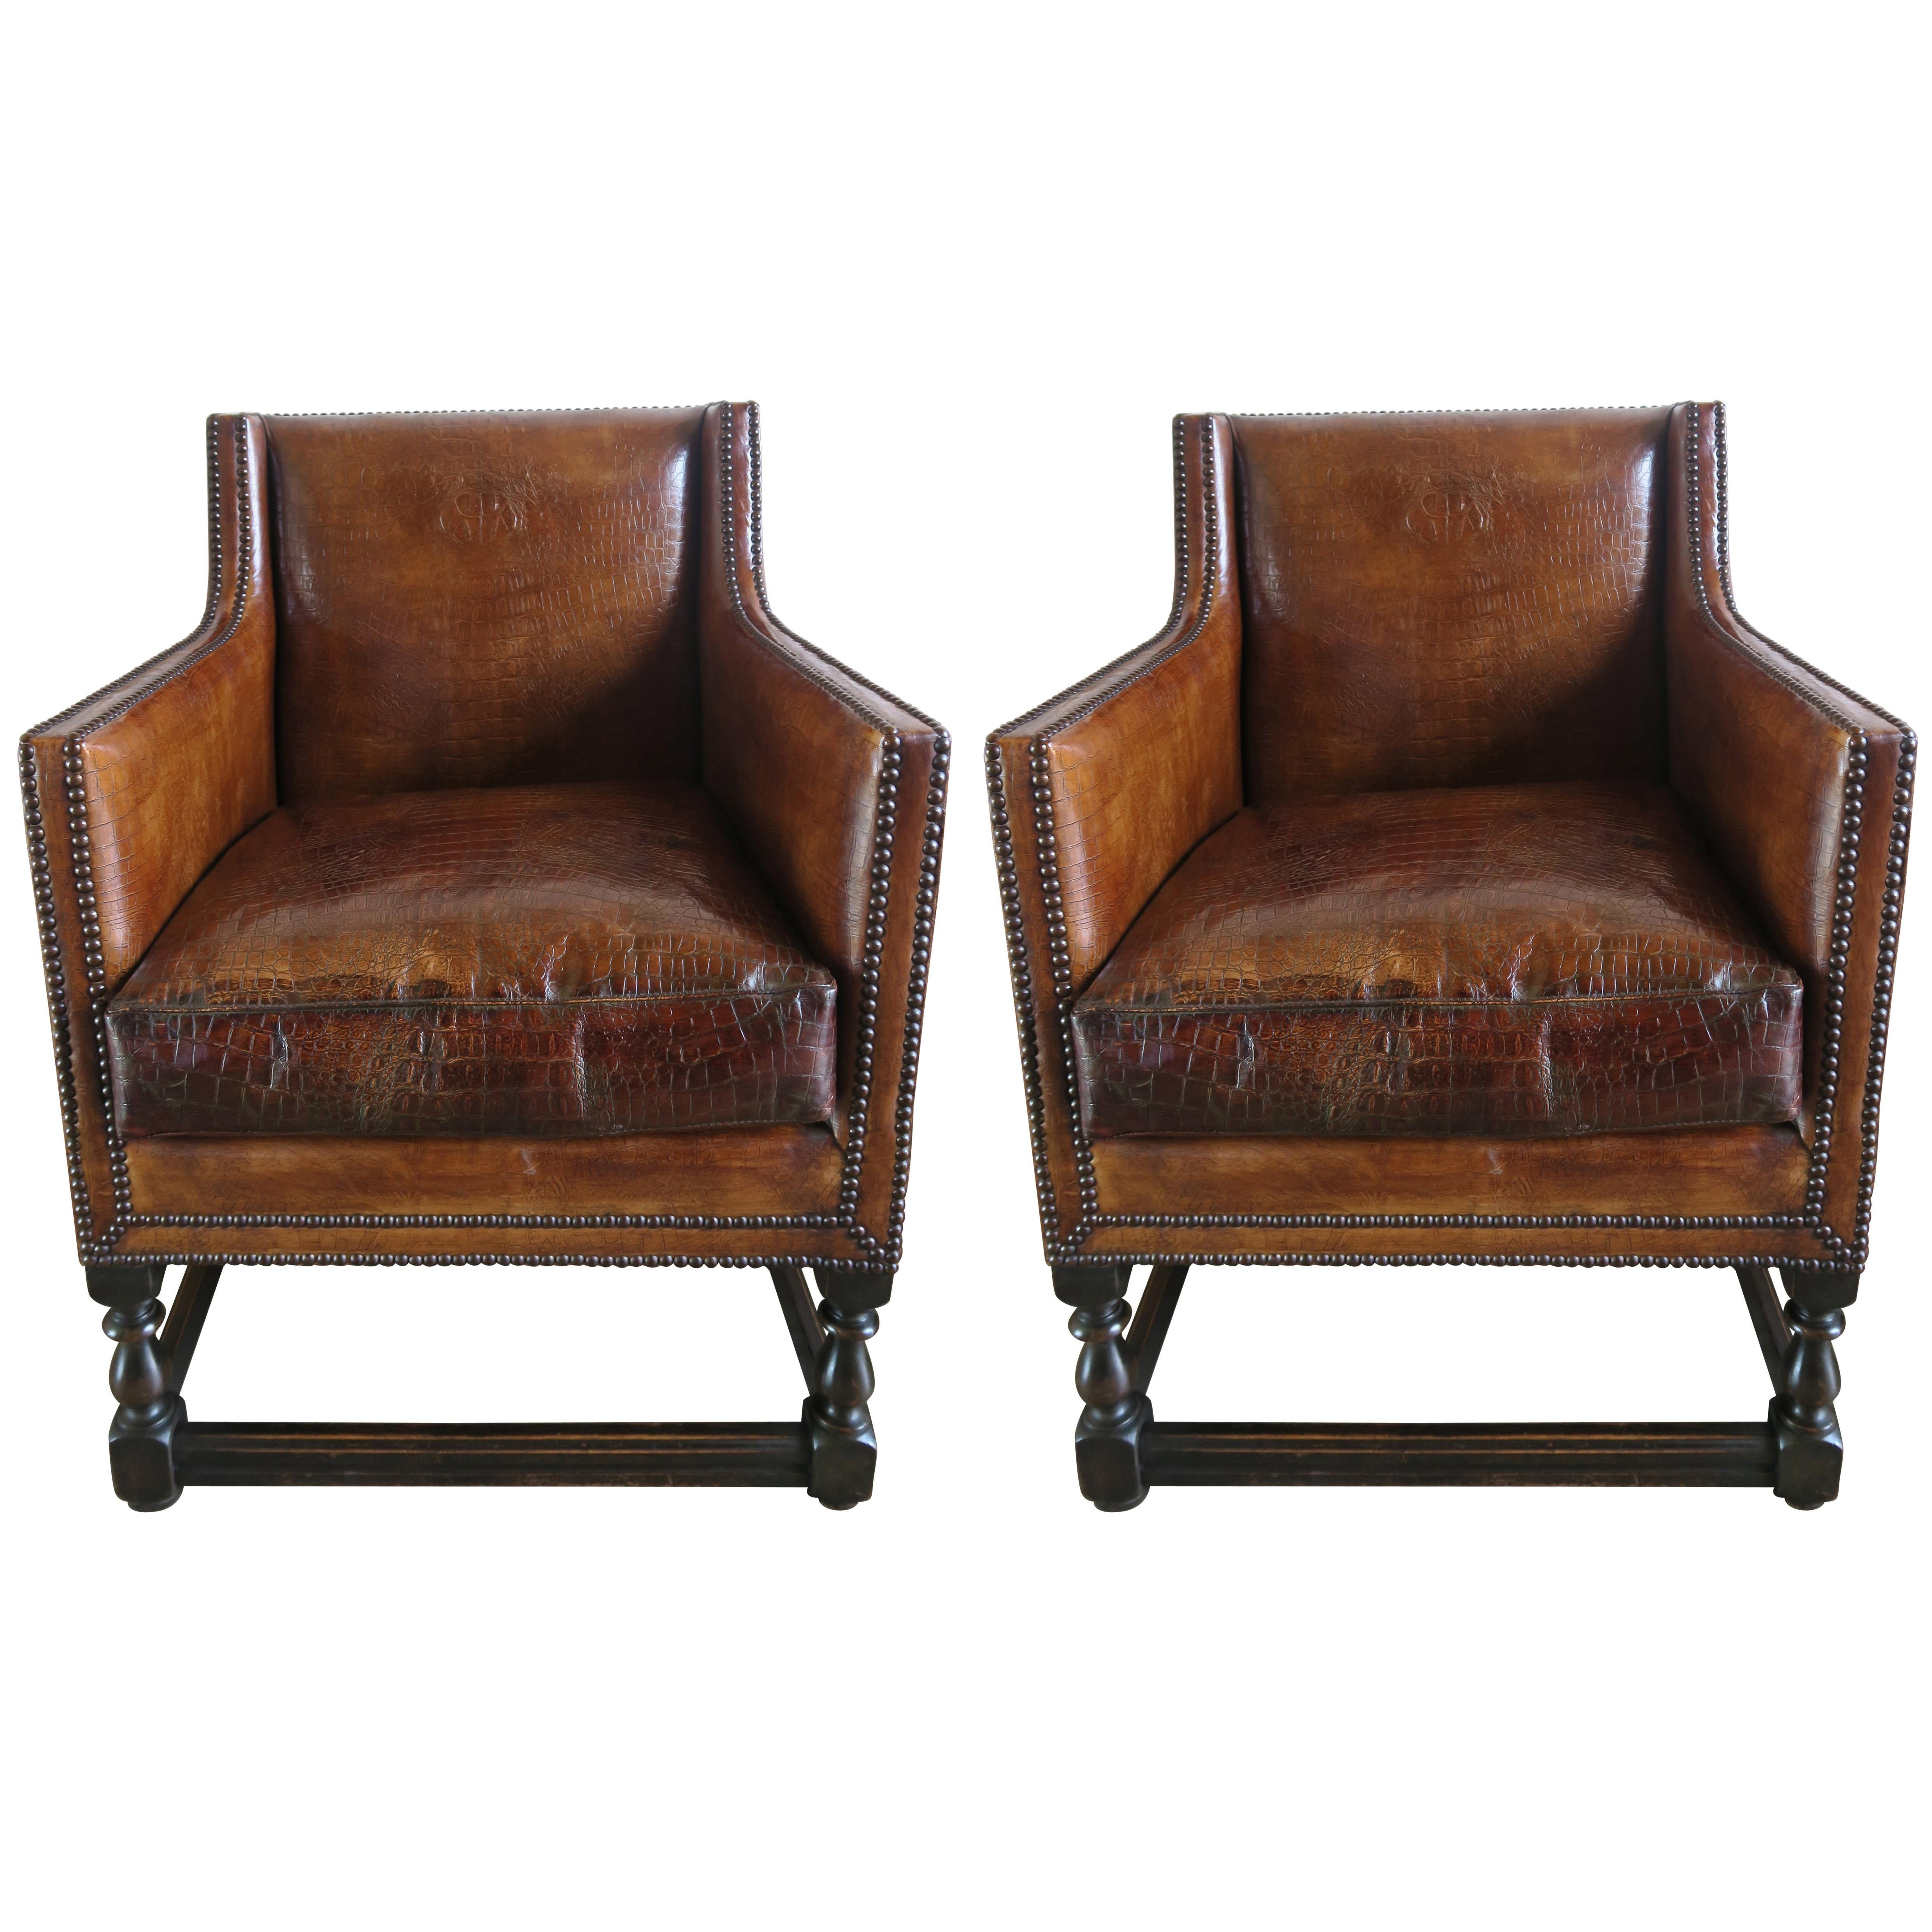 Deco Embossed Faux Crocodile Leather Chairs, Pair